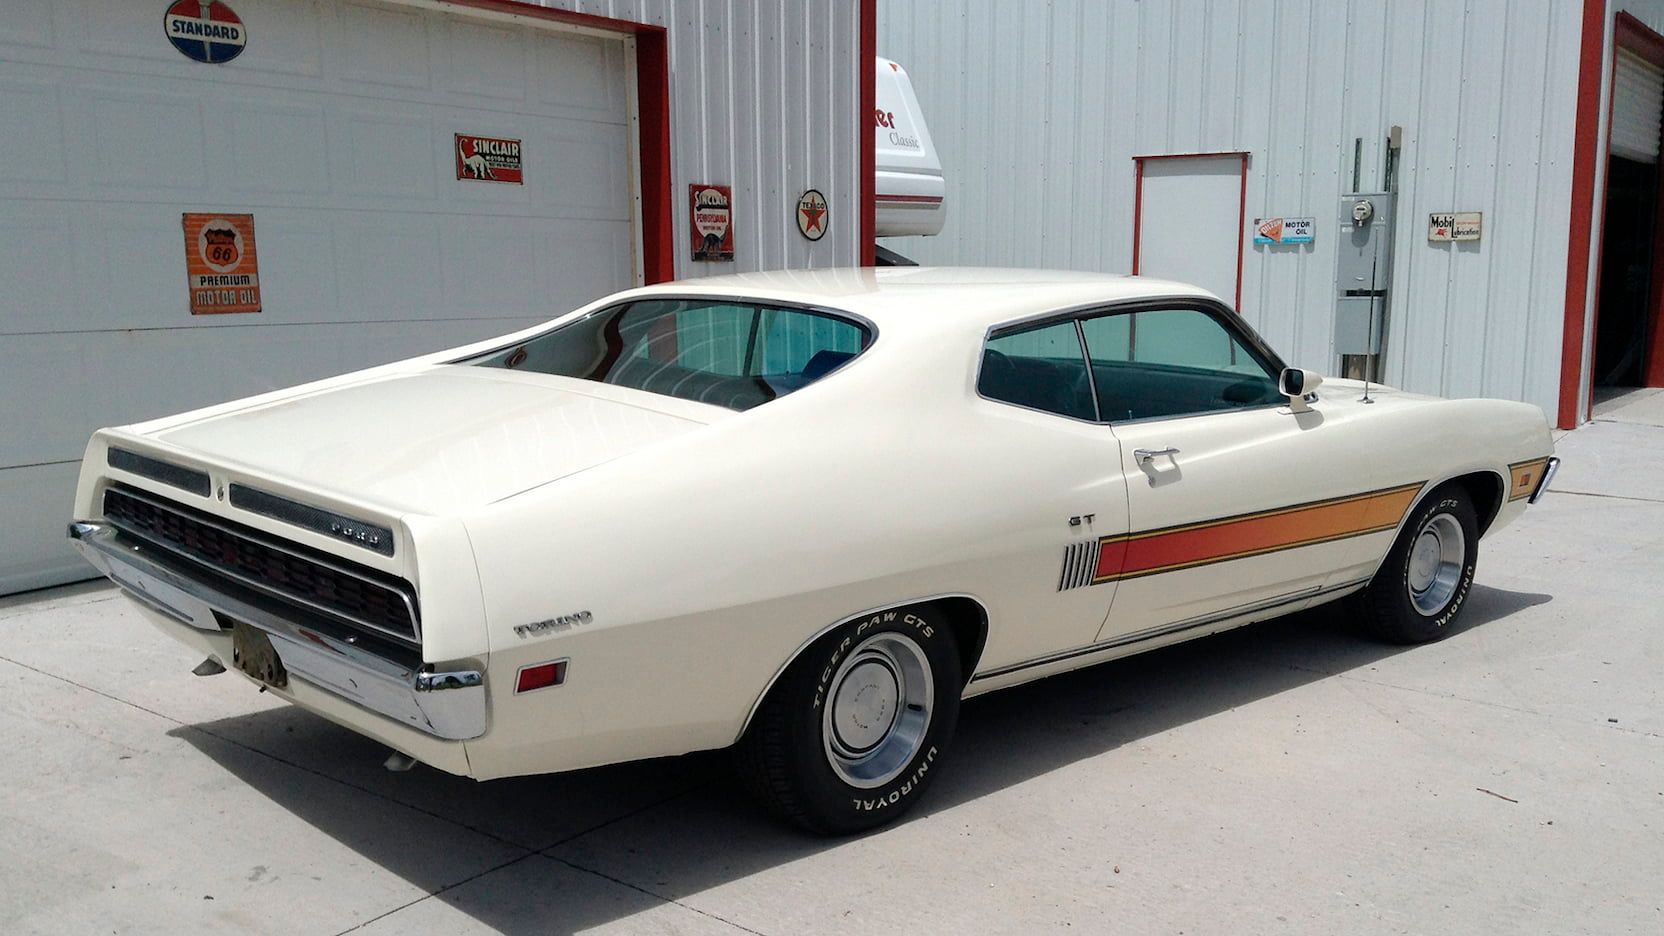 1970 Ford Torino GT 351, white, decal, back, rear